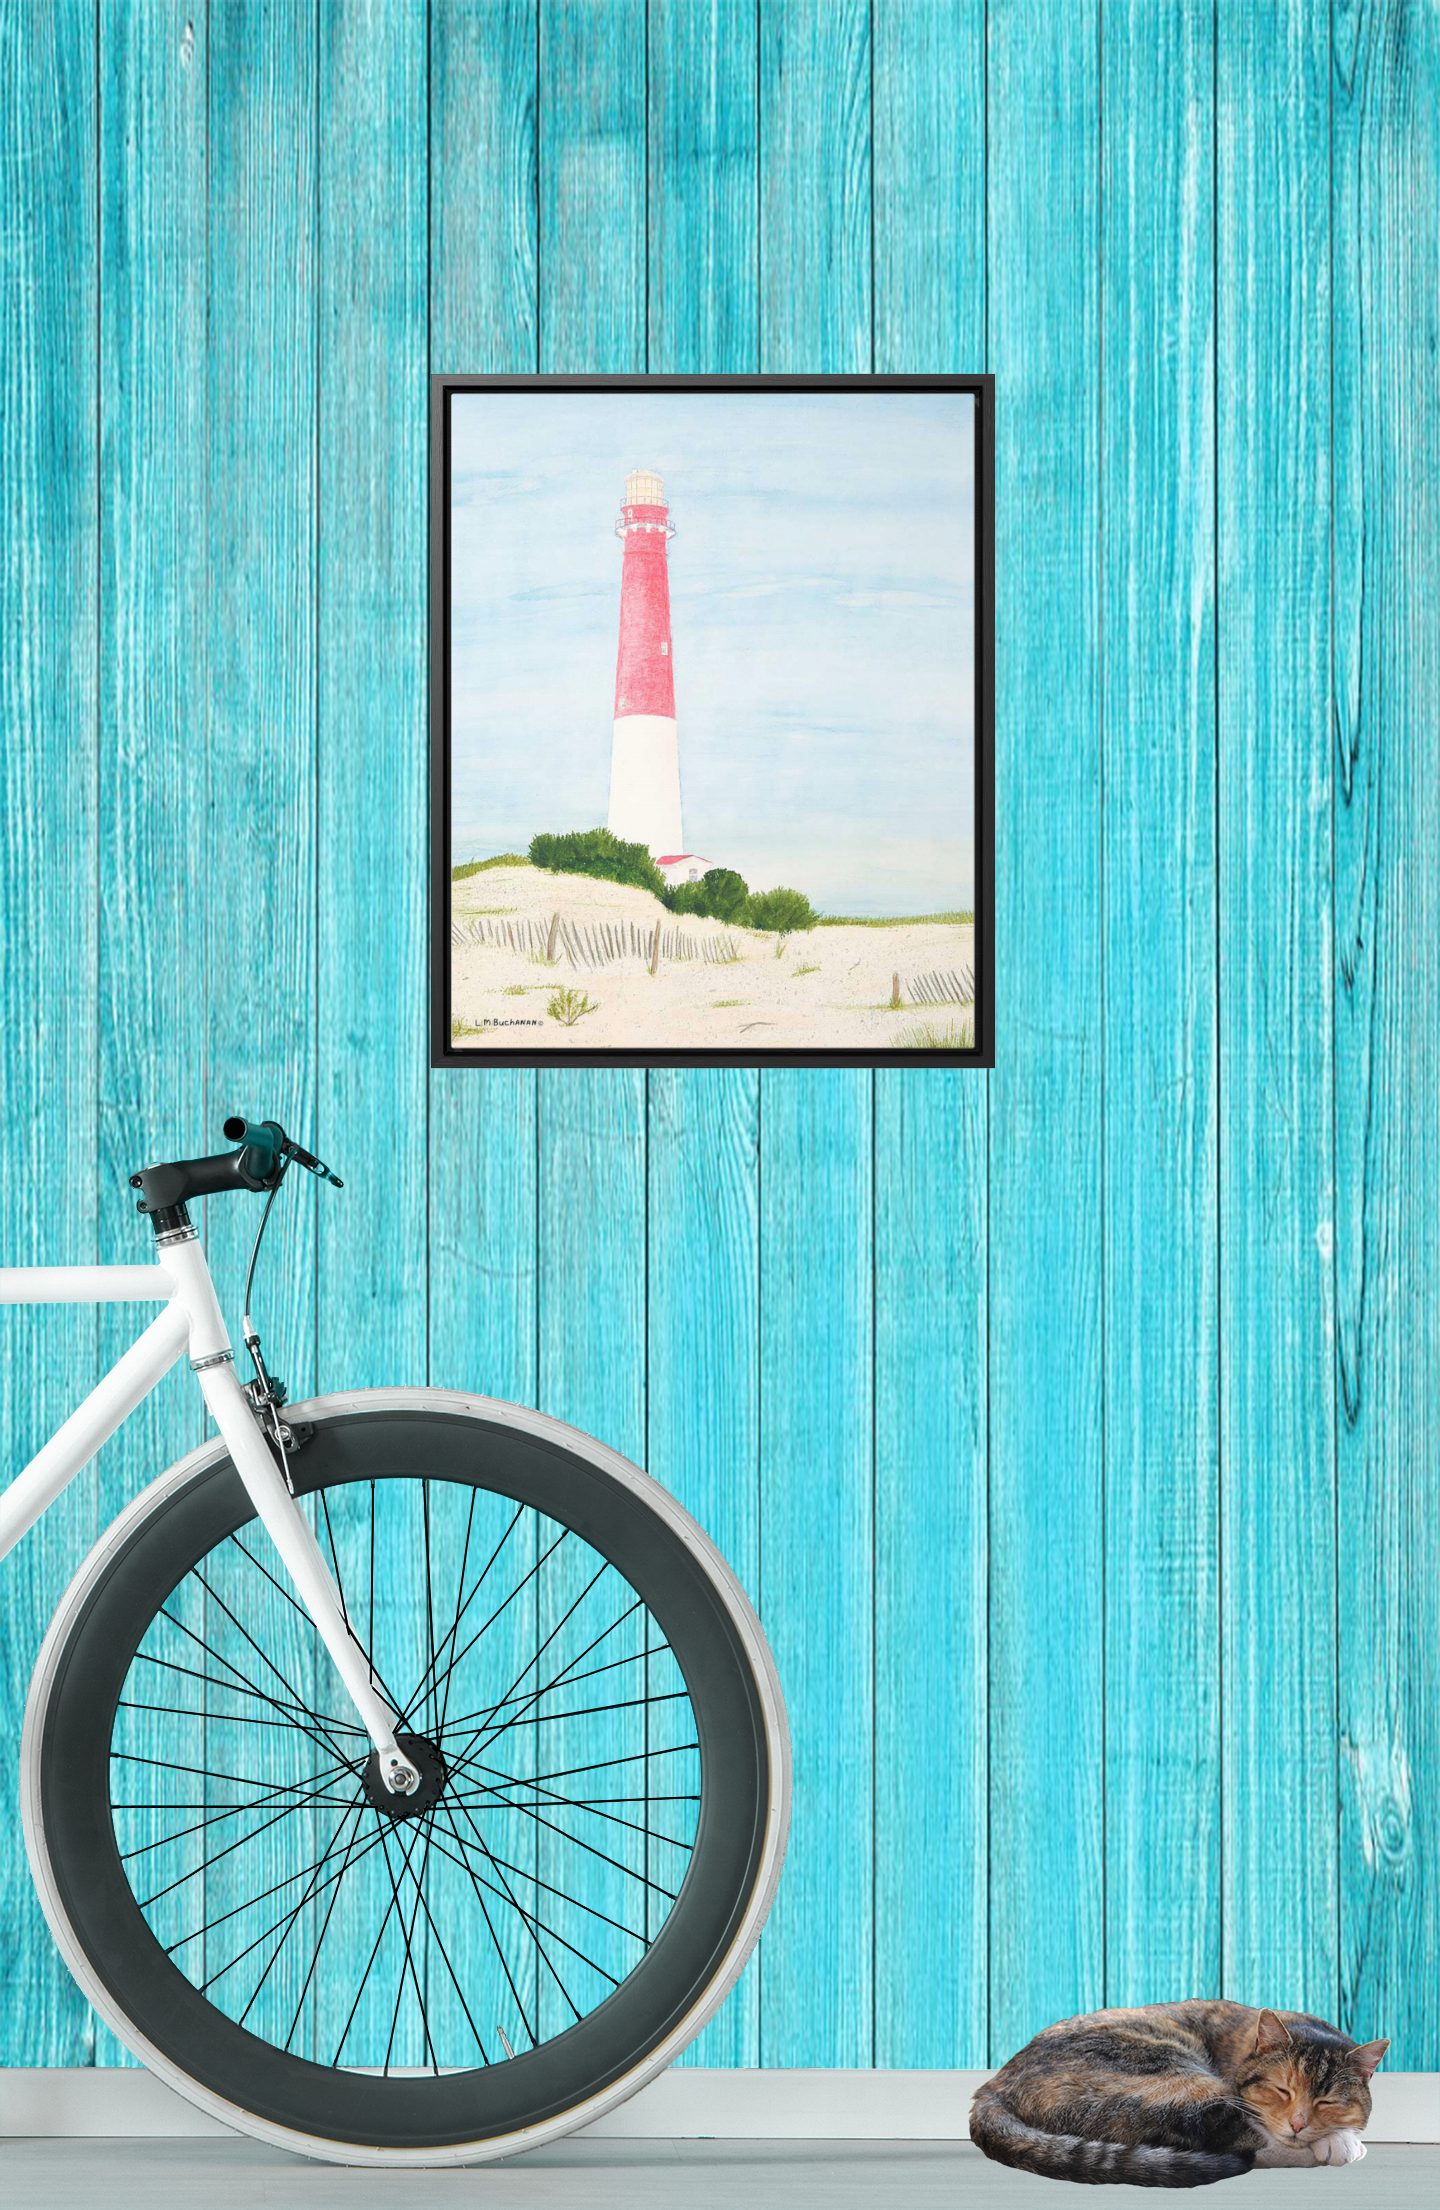 Our Barnegat Lighthouse Gallery Canvas Wrap is a reproduction of a watercolor painting by Lee M. Buchanan. Barnegat Light--known to many as "Old Barney"--has a long history of guarding the Atlantic coastline in New Jersey.